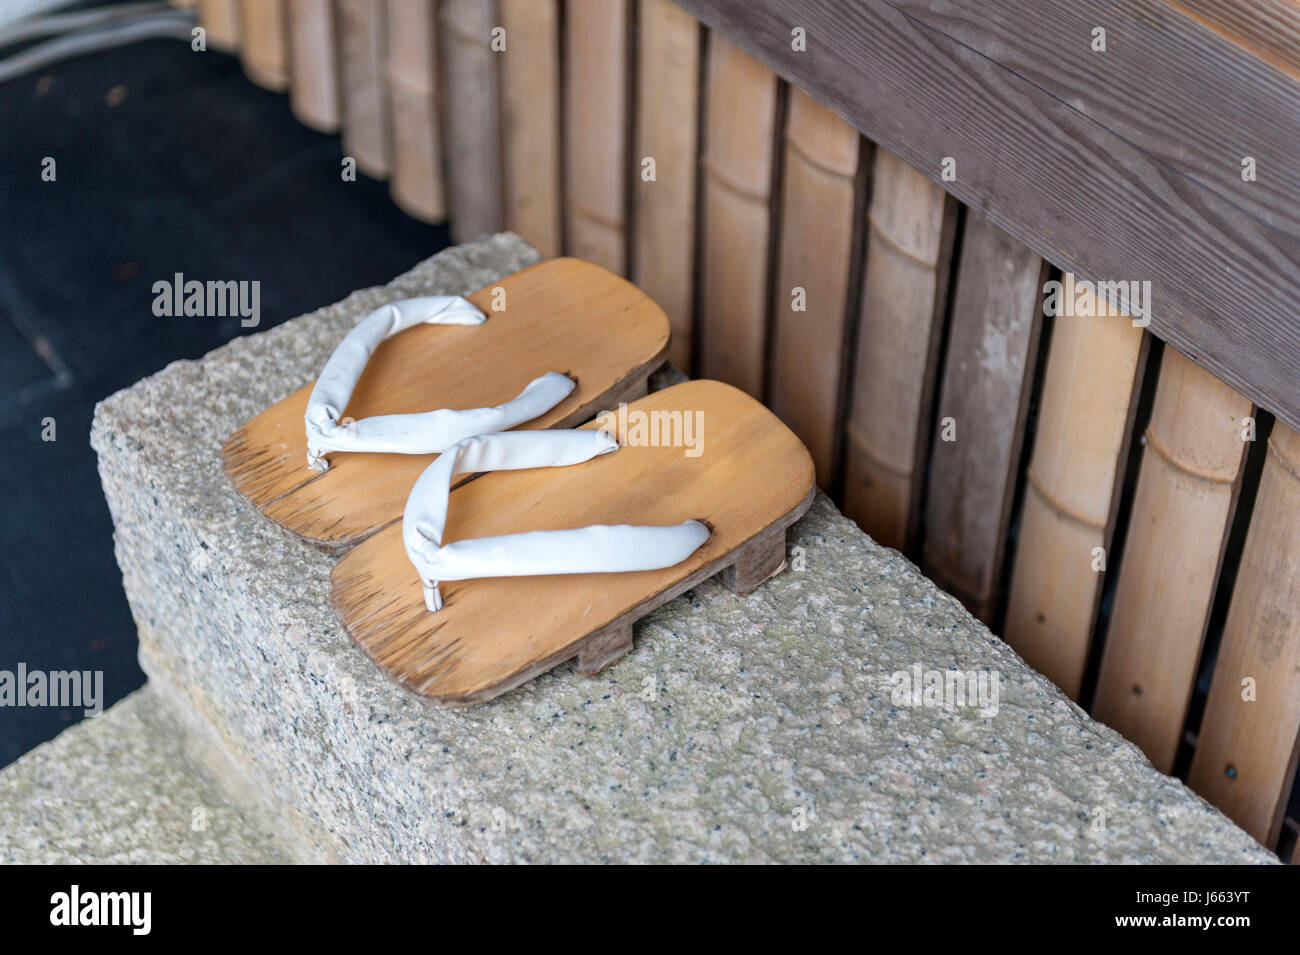 Geta or traditional Japanese footwear, a kind of flip-flops or sandal with an elevated wooden base held onto the foot with a fabric thong strap Stock Photo